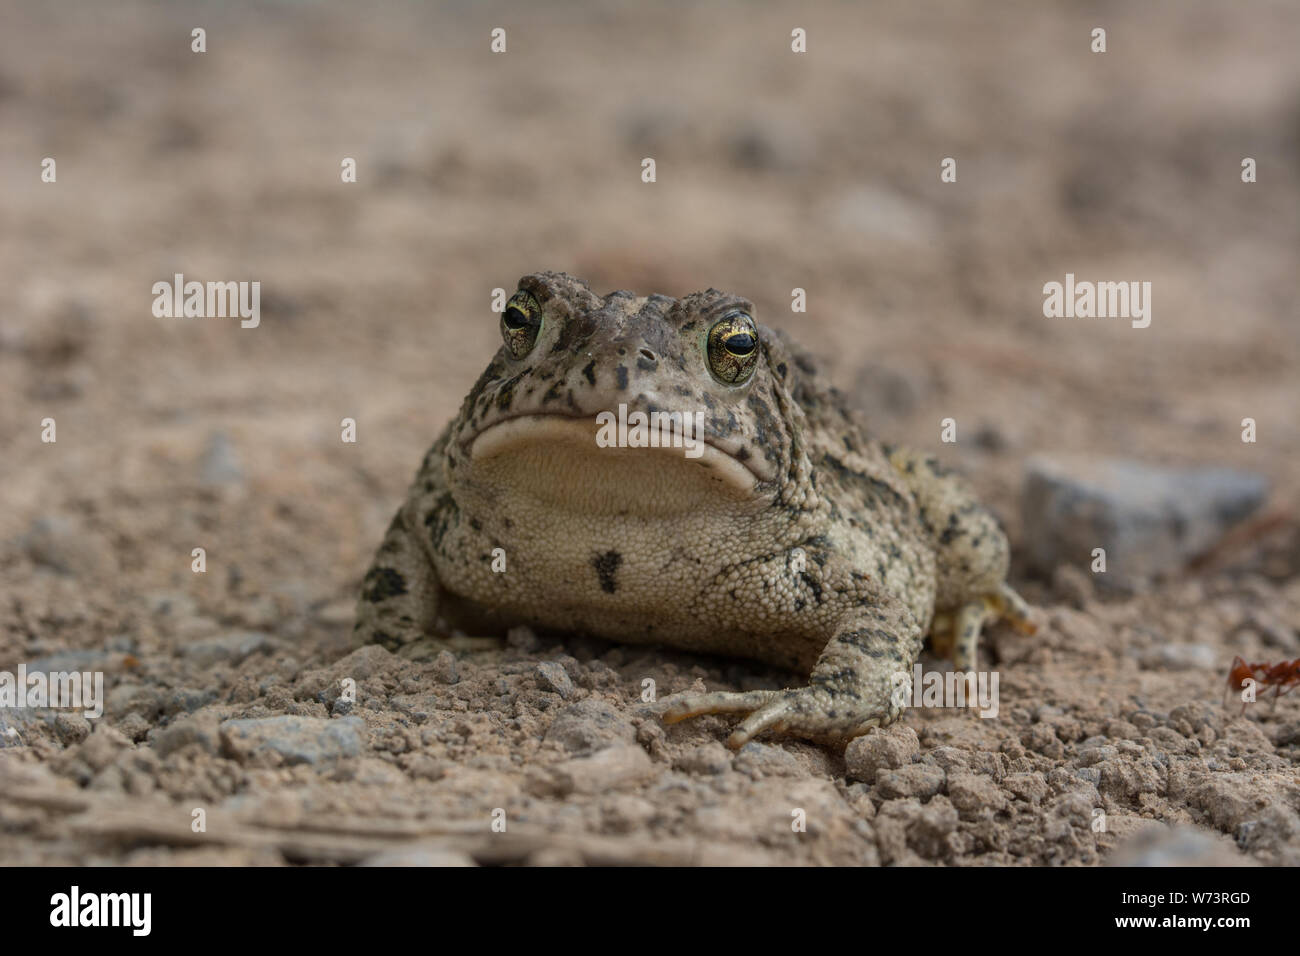 Rocky Mountain (Toad Anaxyrus woodhousii woodhousii) de Delta County, Colorado, USA. Banque D'Images